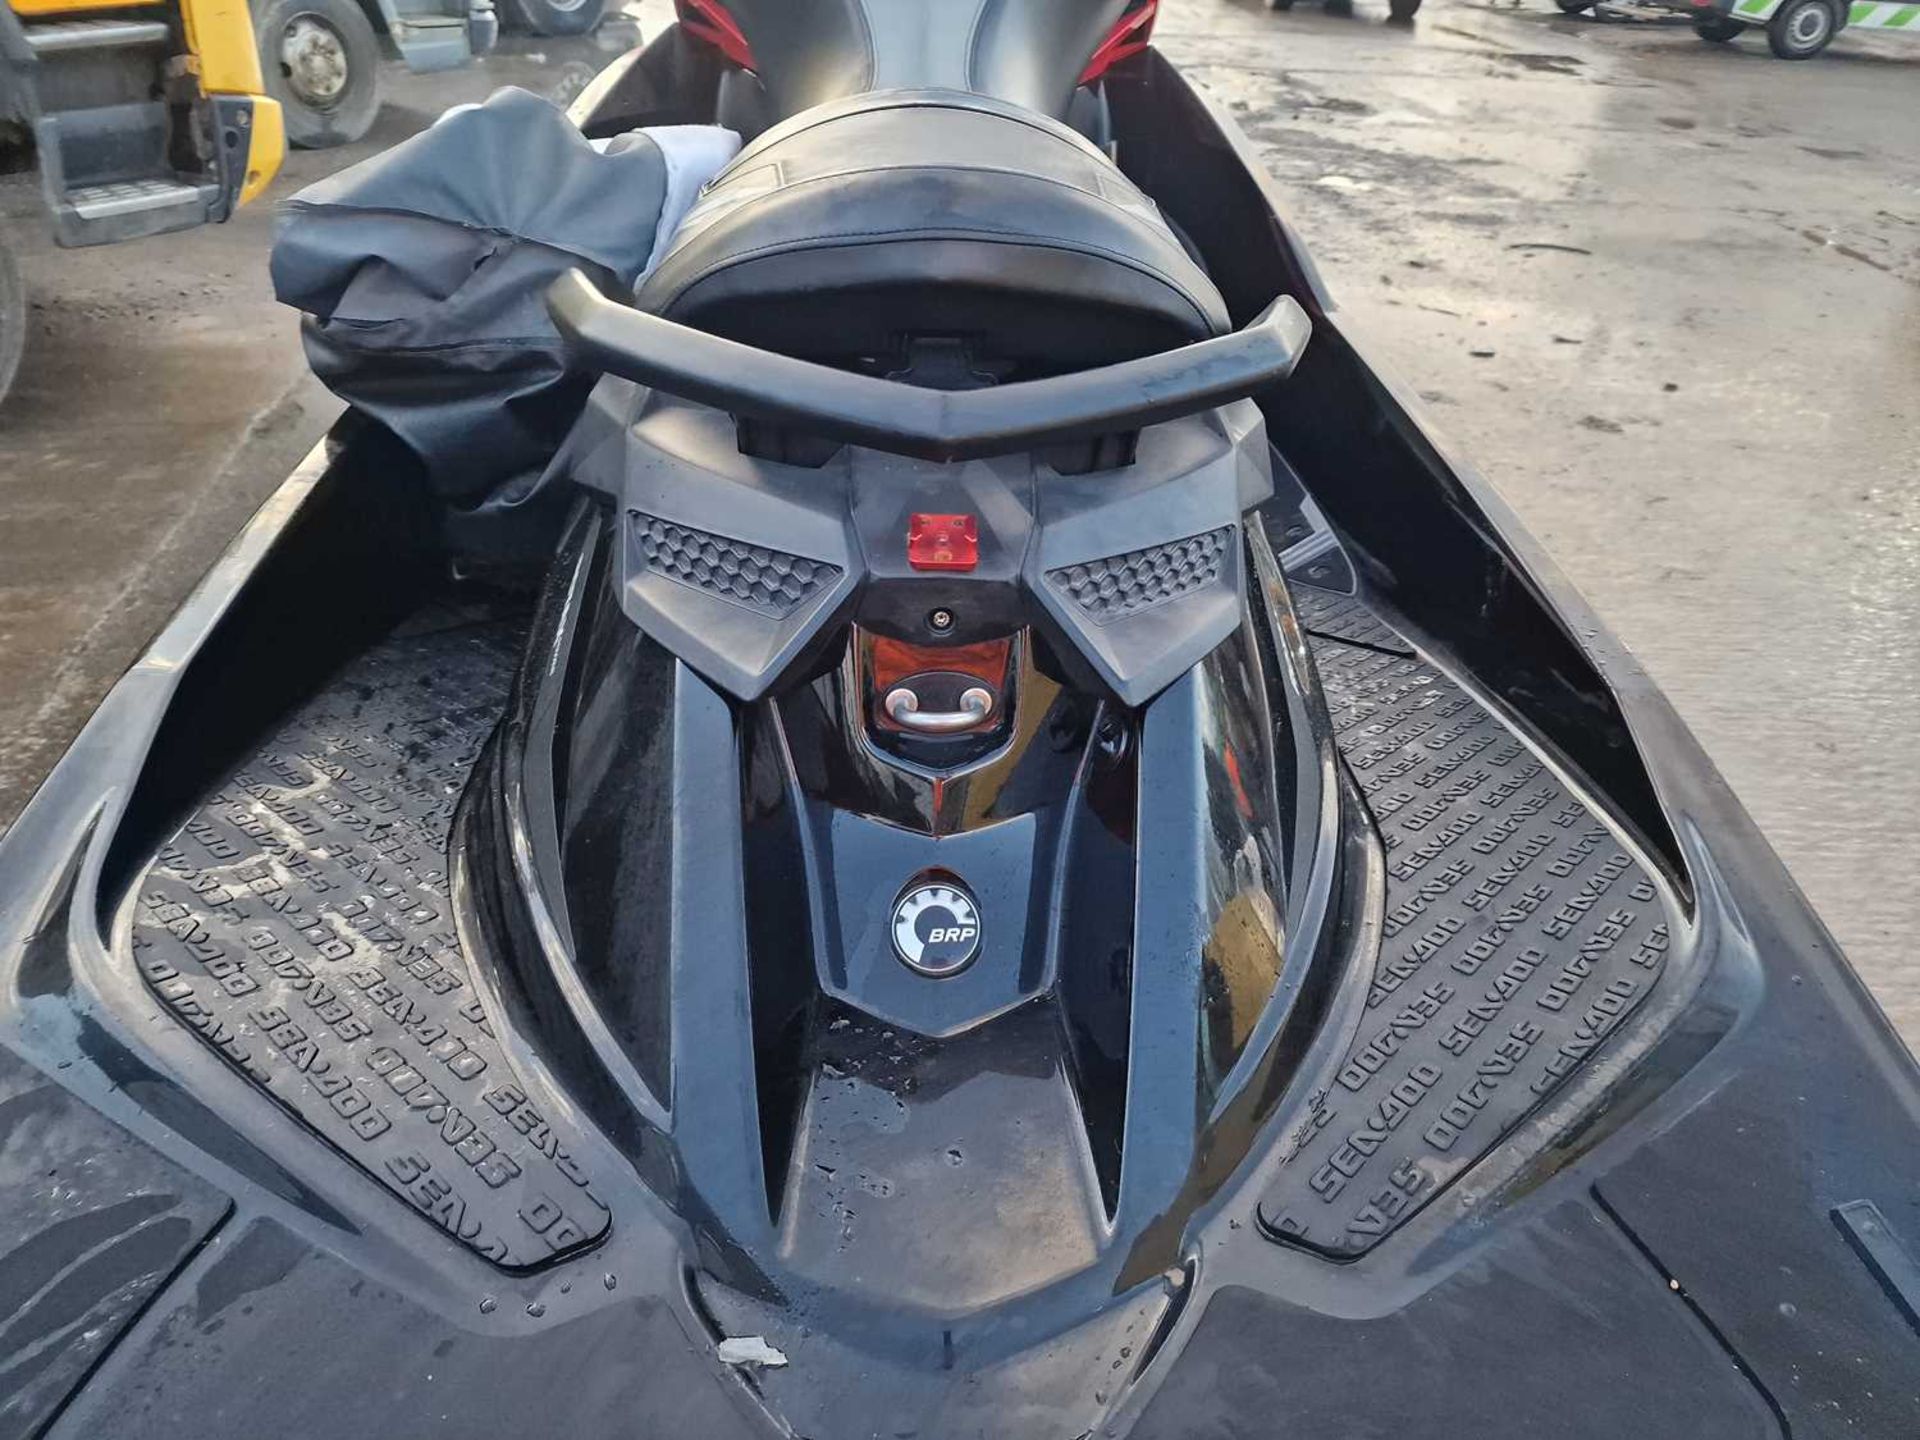 2014 Seadoo RXP 260RS Jet Ski with Single Axle Trailer - Image 8 of 9